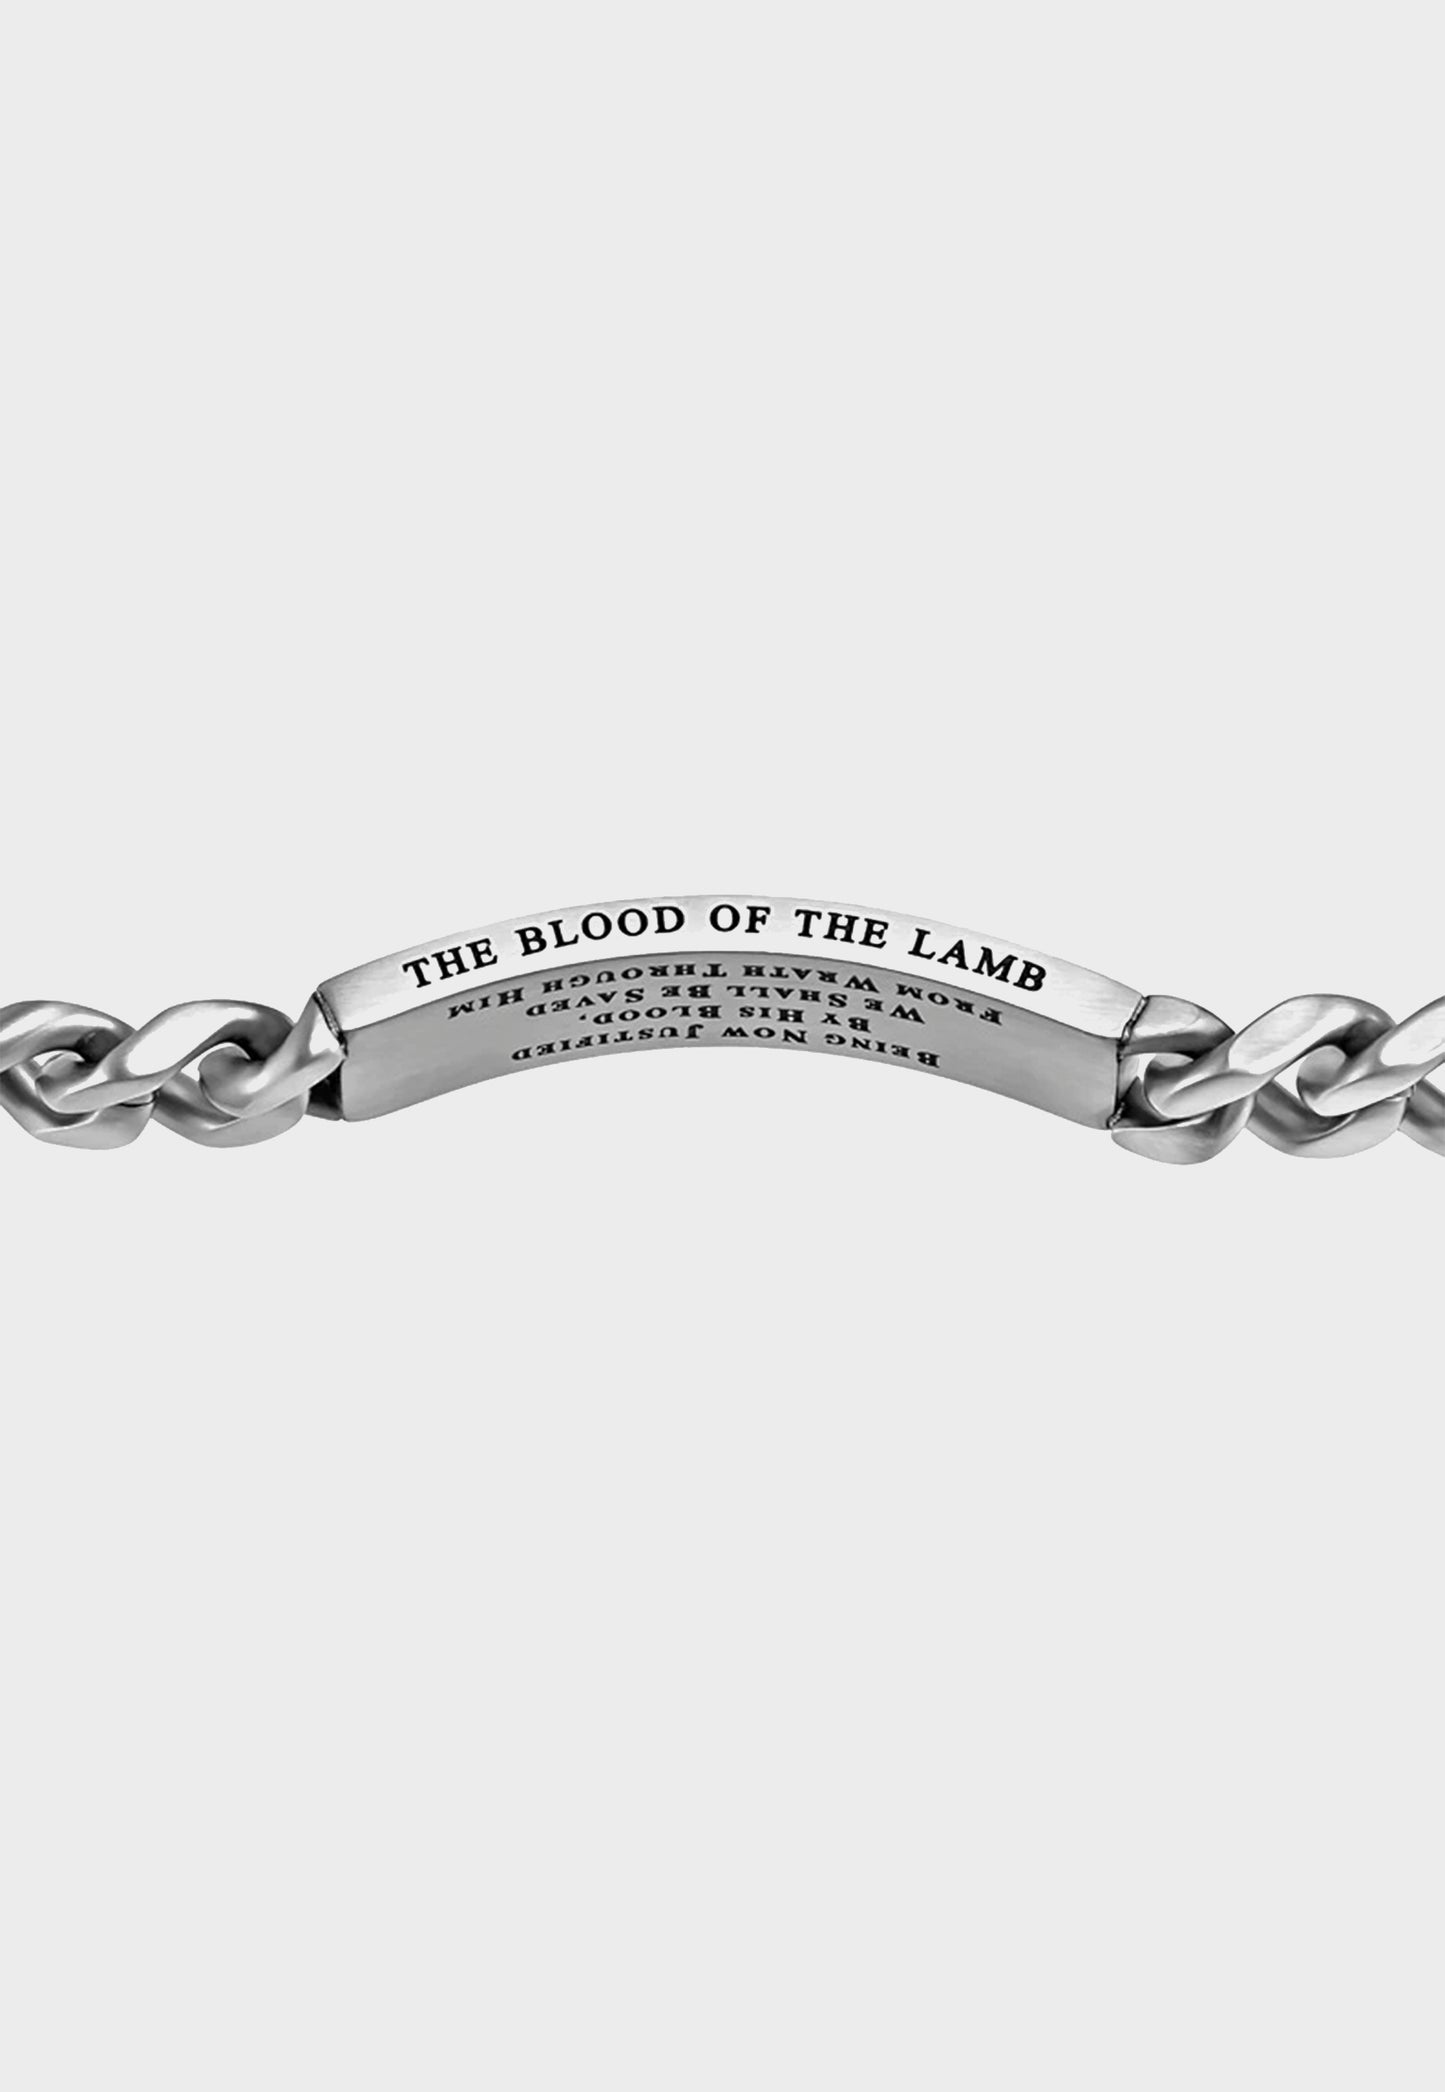 Saved by the blood of the Lamb Christian bracelet